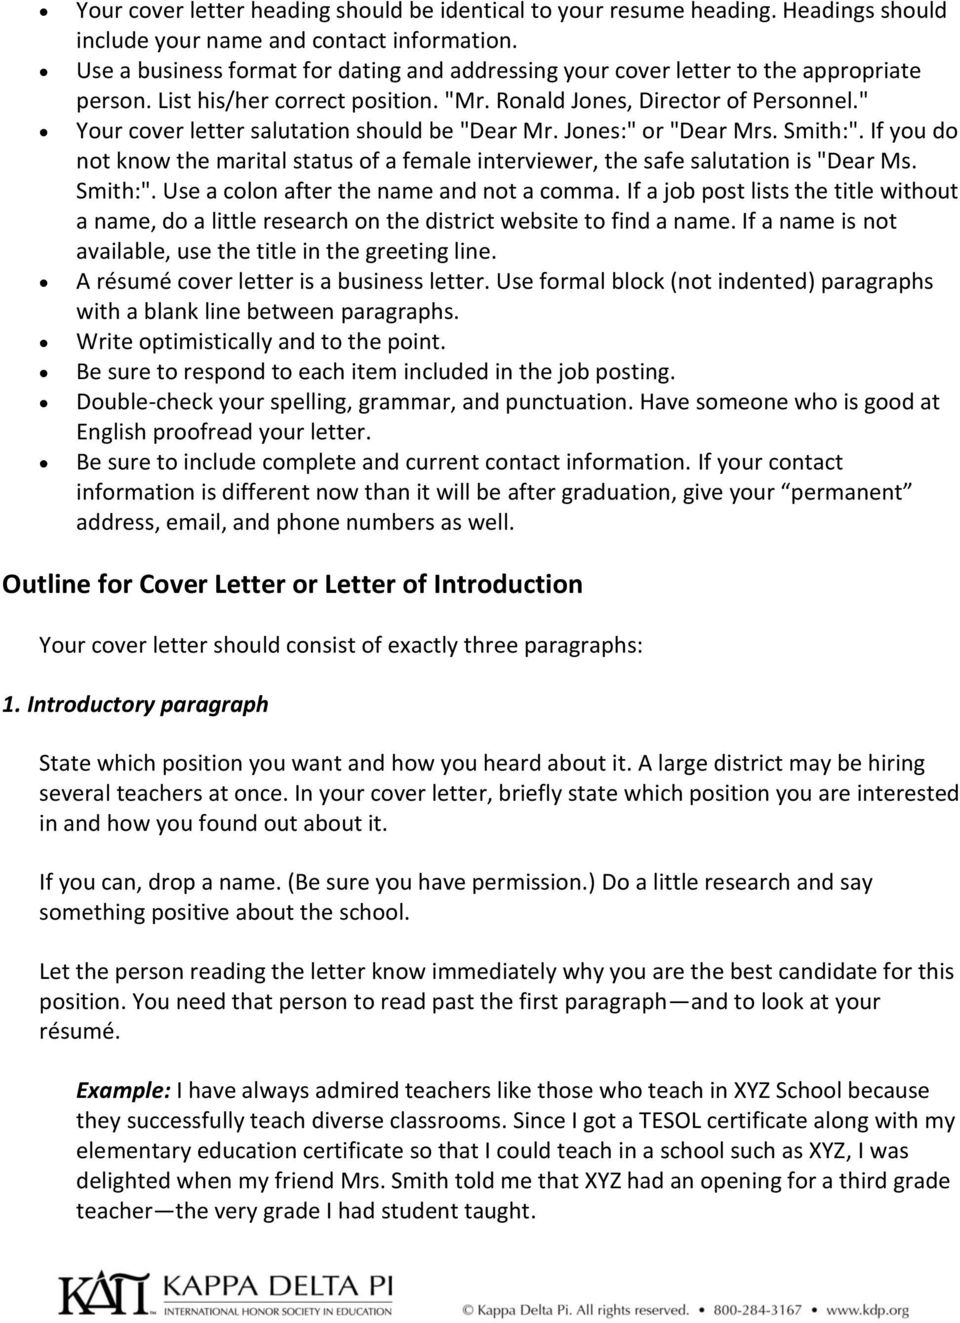 Introduction Of Cover Letter from docplayer.net